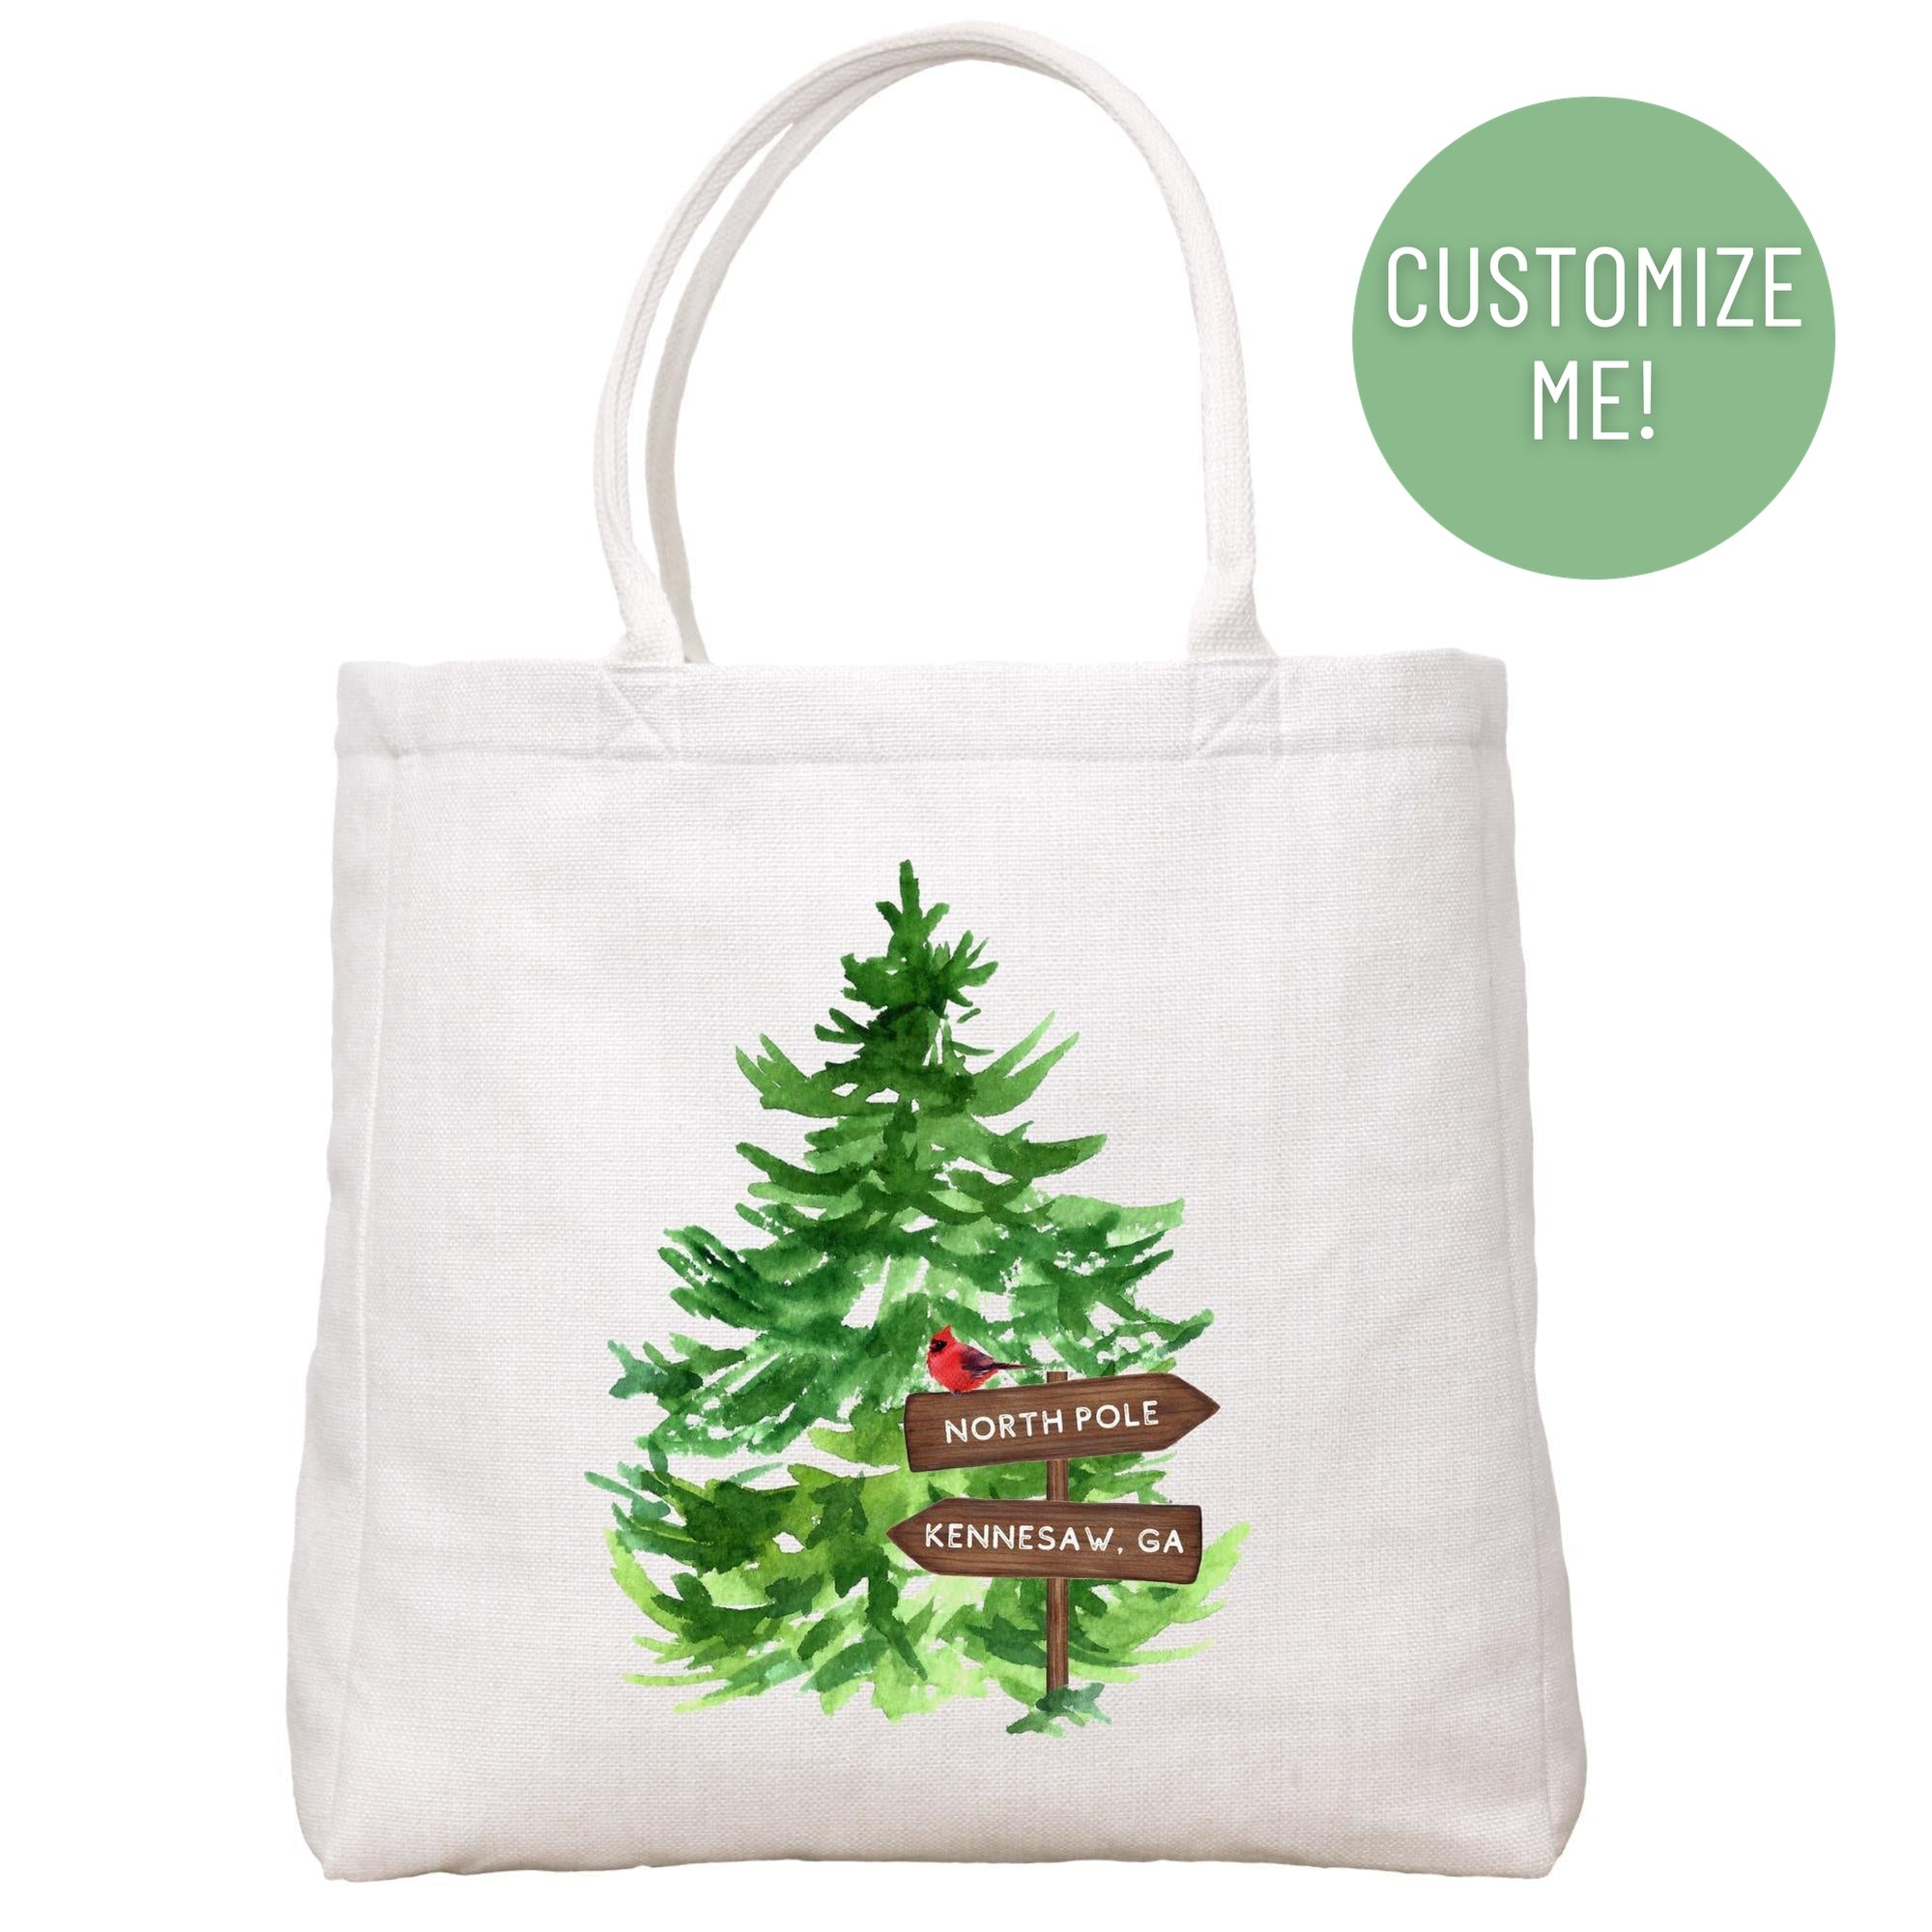 North Pole Directional Sign Tote Bag